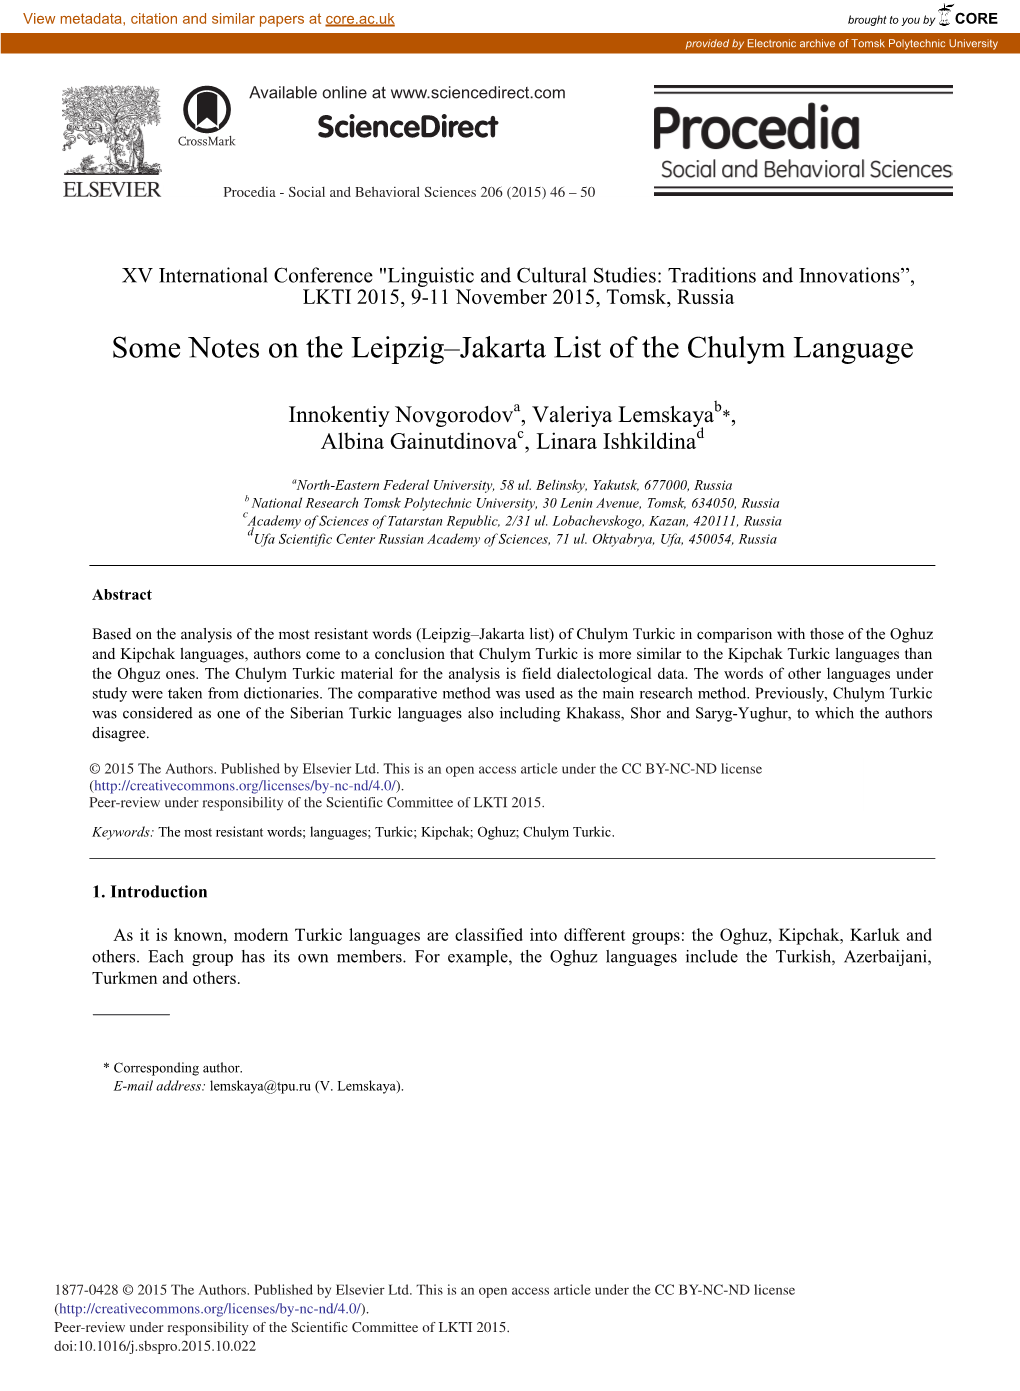 Some Notes on the Leipzig–Jakarta List of the Chulym Language